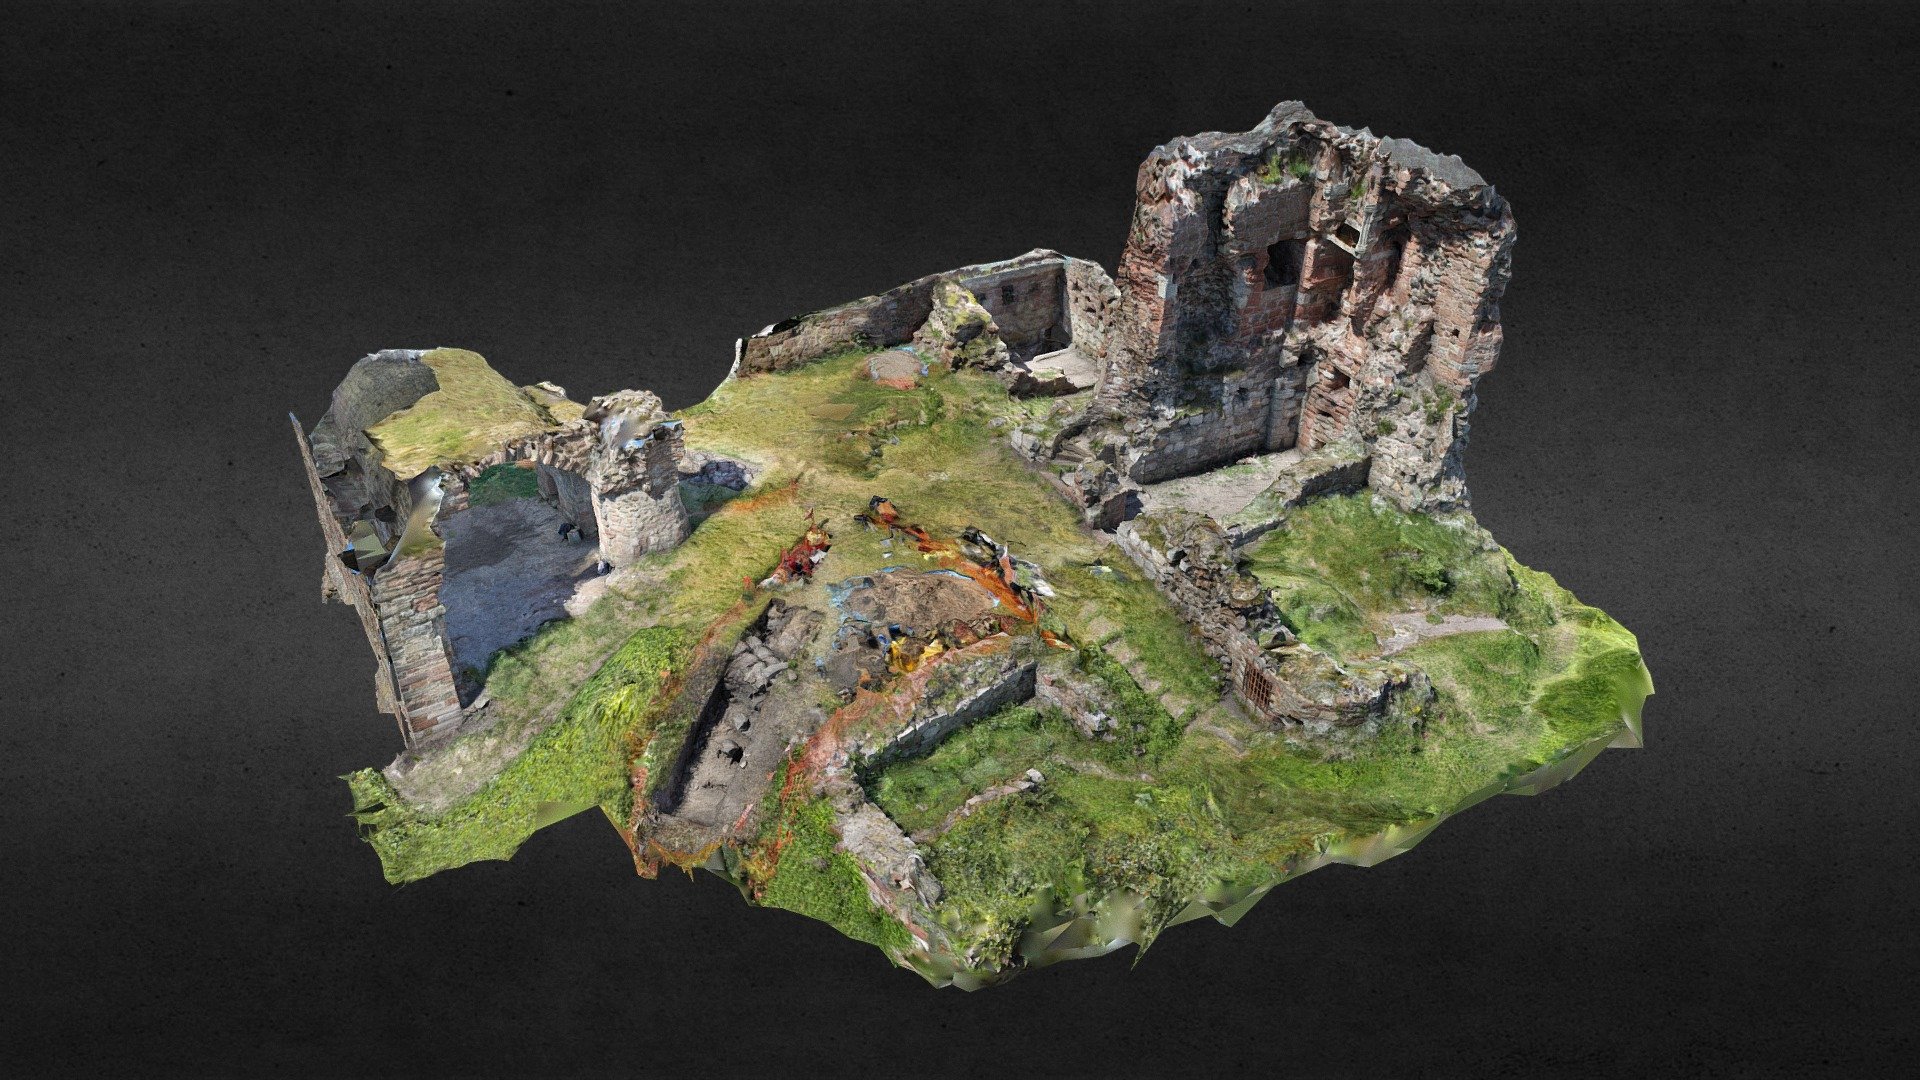 3D model of Ardrossan Castle during the 1st week of the Exploring Castle Hill Excavations of 2019. The model was captured with photos taken on two seperate days and with visitors and diggers milling about but Reality Capture software has filtered much of this noise out and blender was used to edit out any problem area's.

Exploring Castle Hill is part of a Cultural Heritage and Archaeology Project being led by Northlight Heritage for Garnock Connections. The Project is funded by the Heritage Lottery Fund and Historic Environment Scotland. The excavations were carried out by Rathmell Archaeology &amp; Ardrossan Castle Heritage Society 3d model